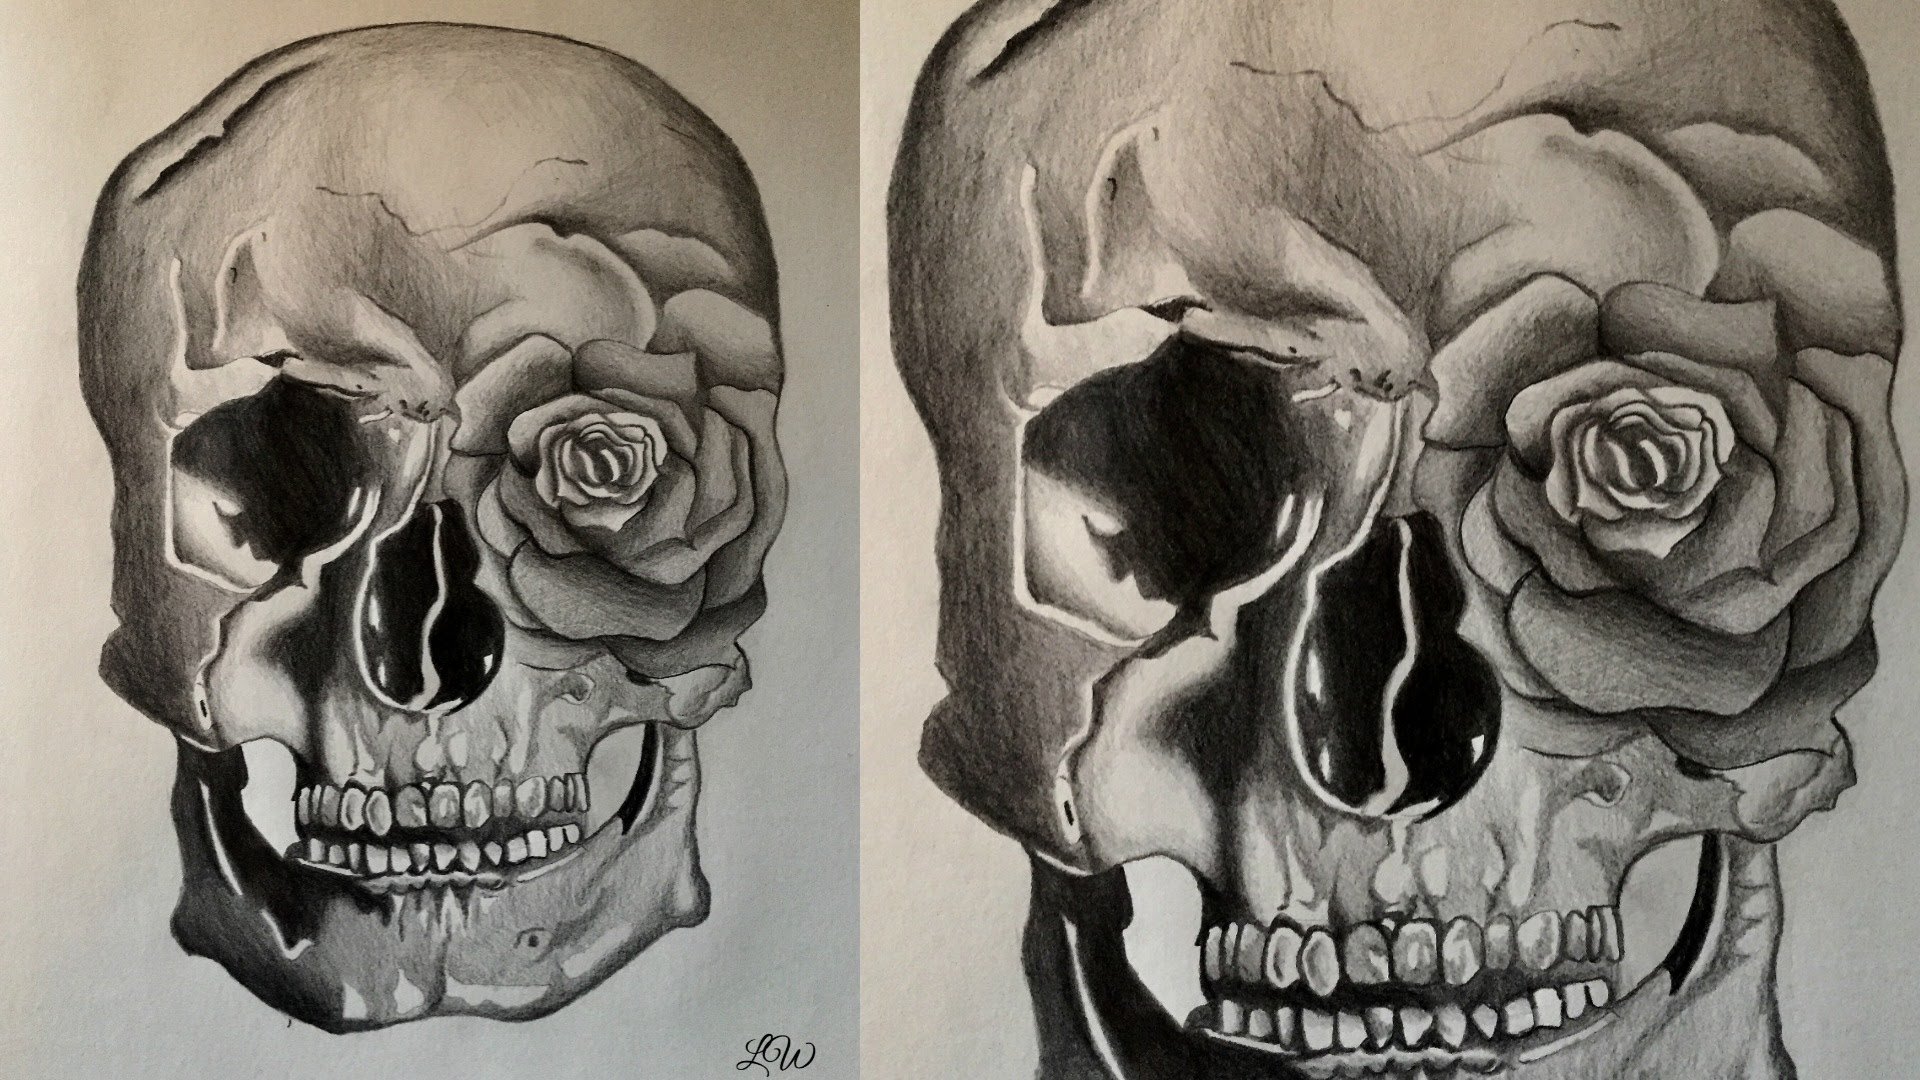 How To Draw A Rose Amp Skull - Skull Drawings With Roses - HD Wallpaper 